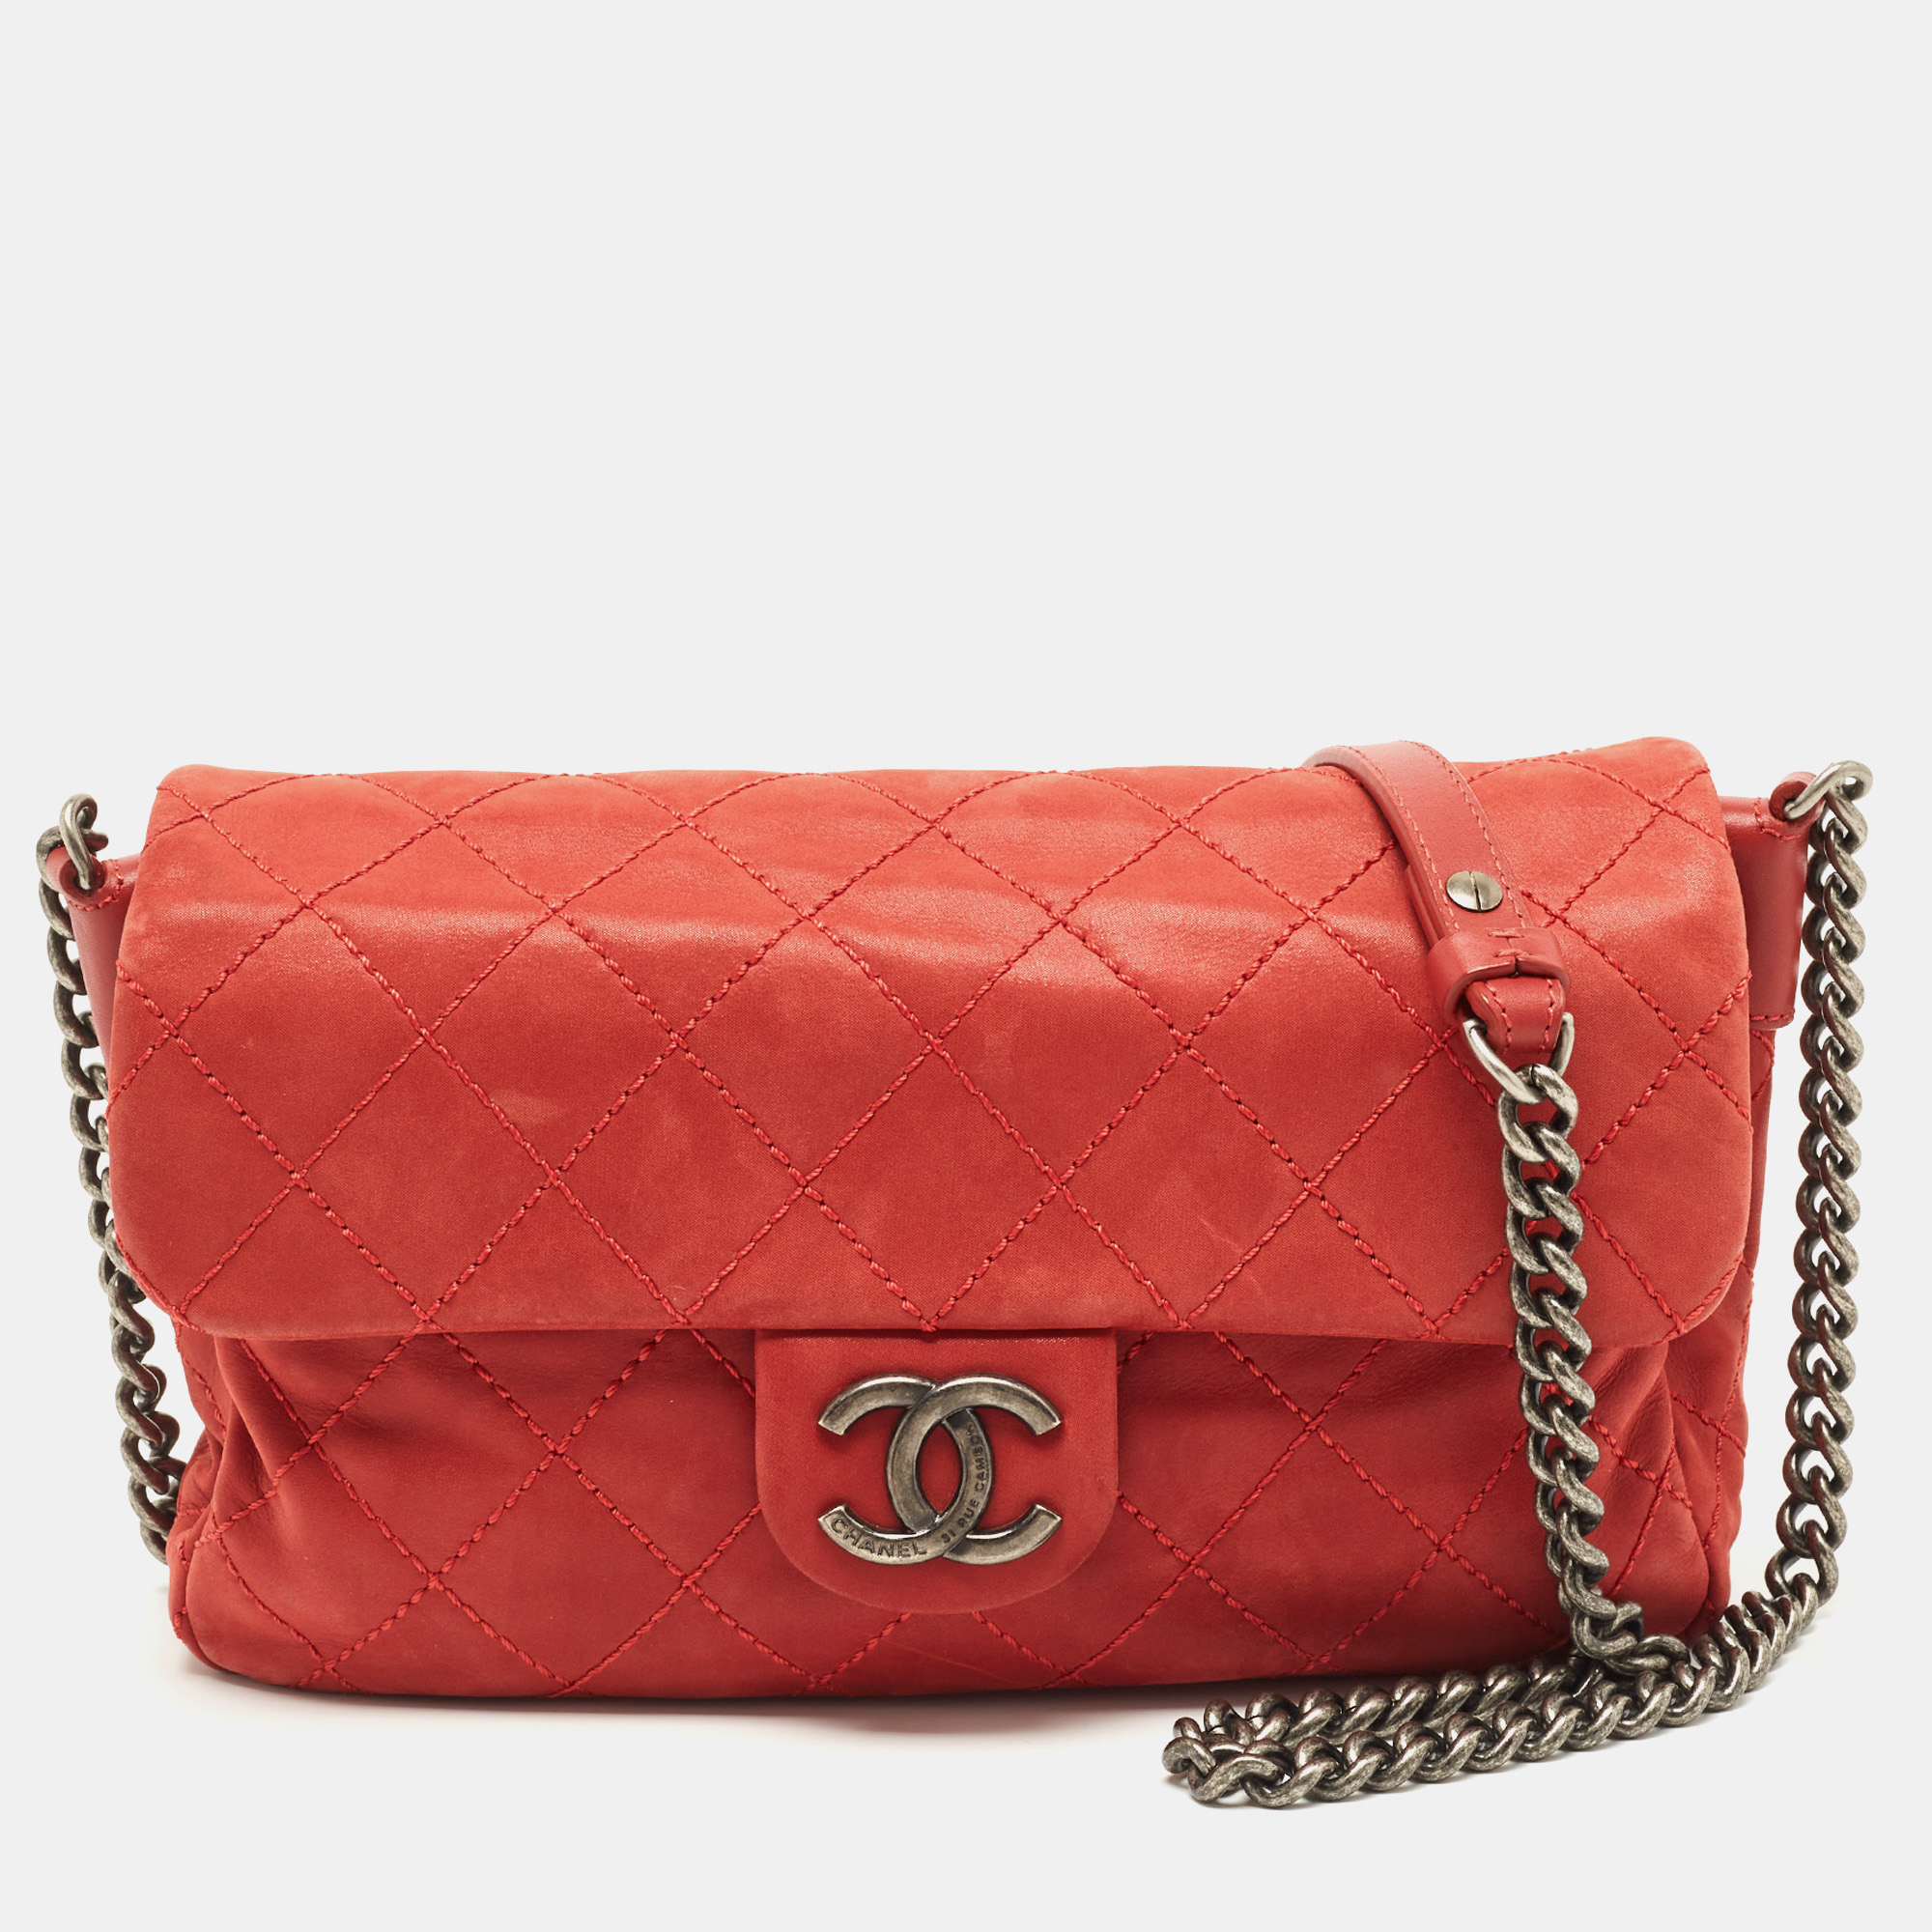 Chanel red quilted iridescent leather cc flap crossbody bag